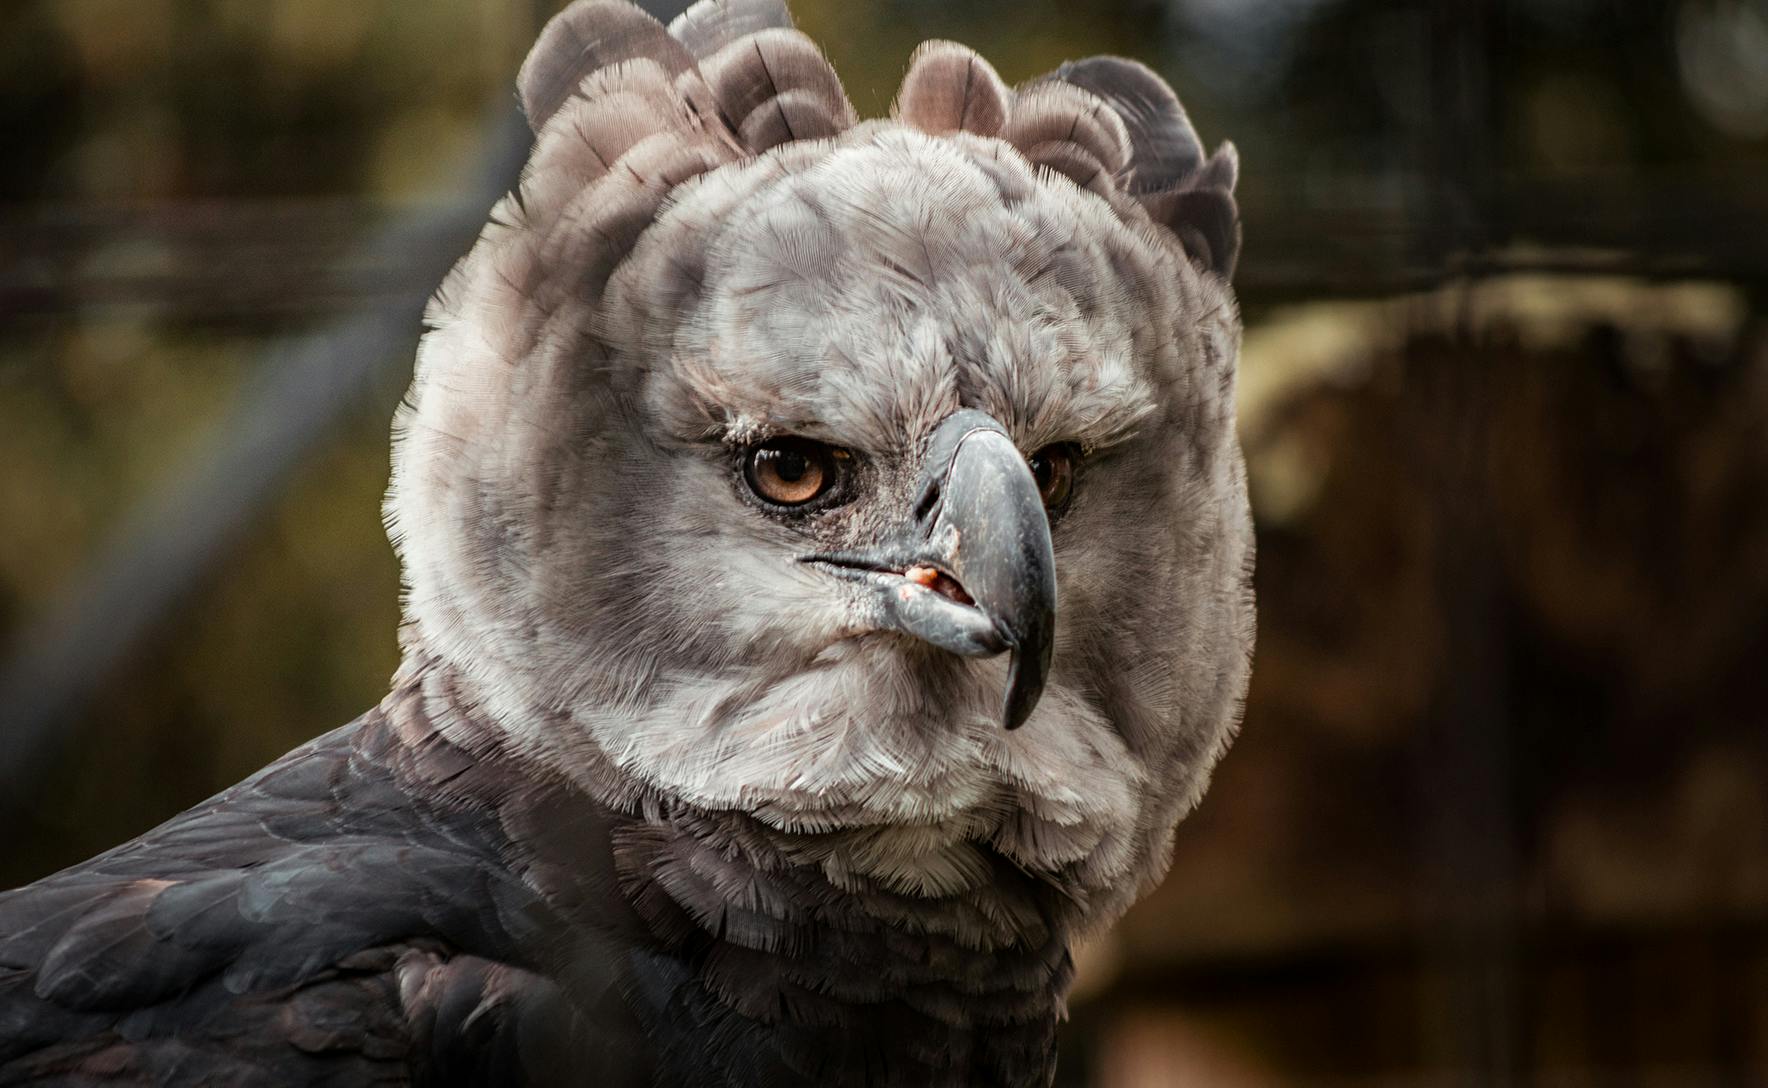 A close up photo of a light brown coloured harpy eagle. The bird has amber eyes and a sharp curved beak. 